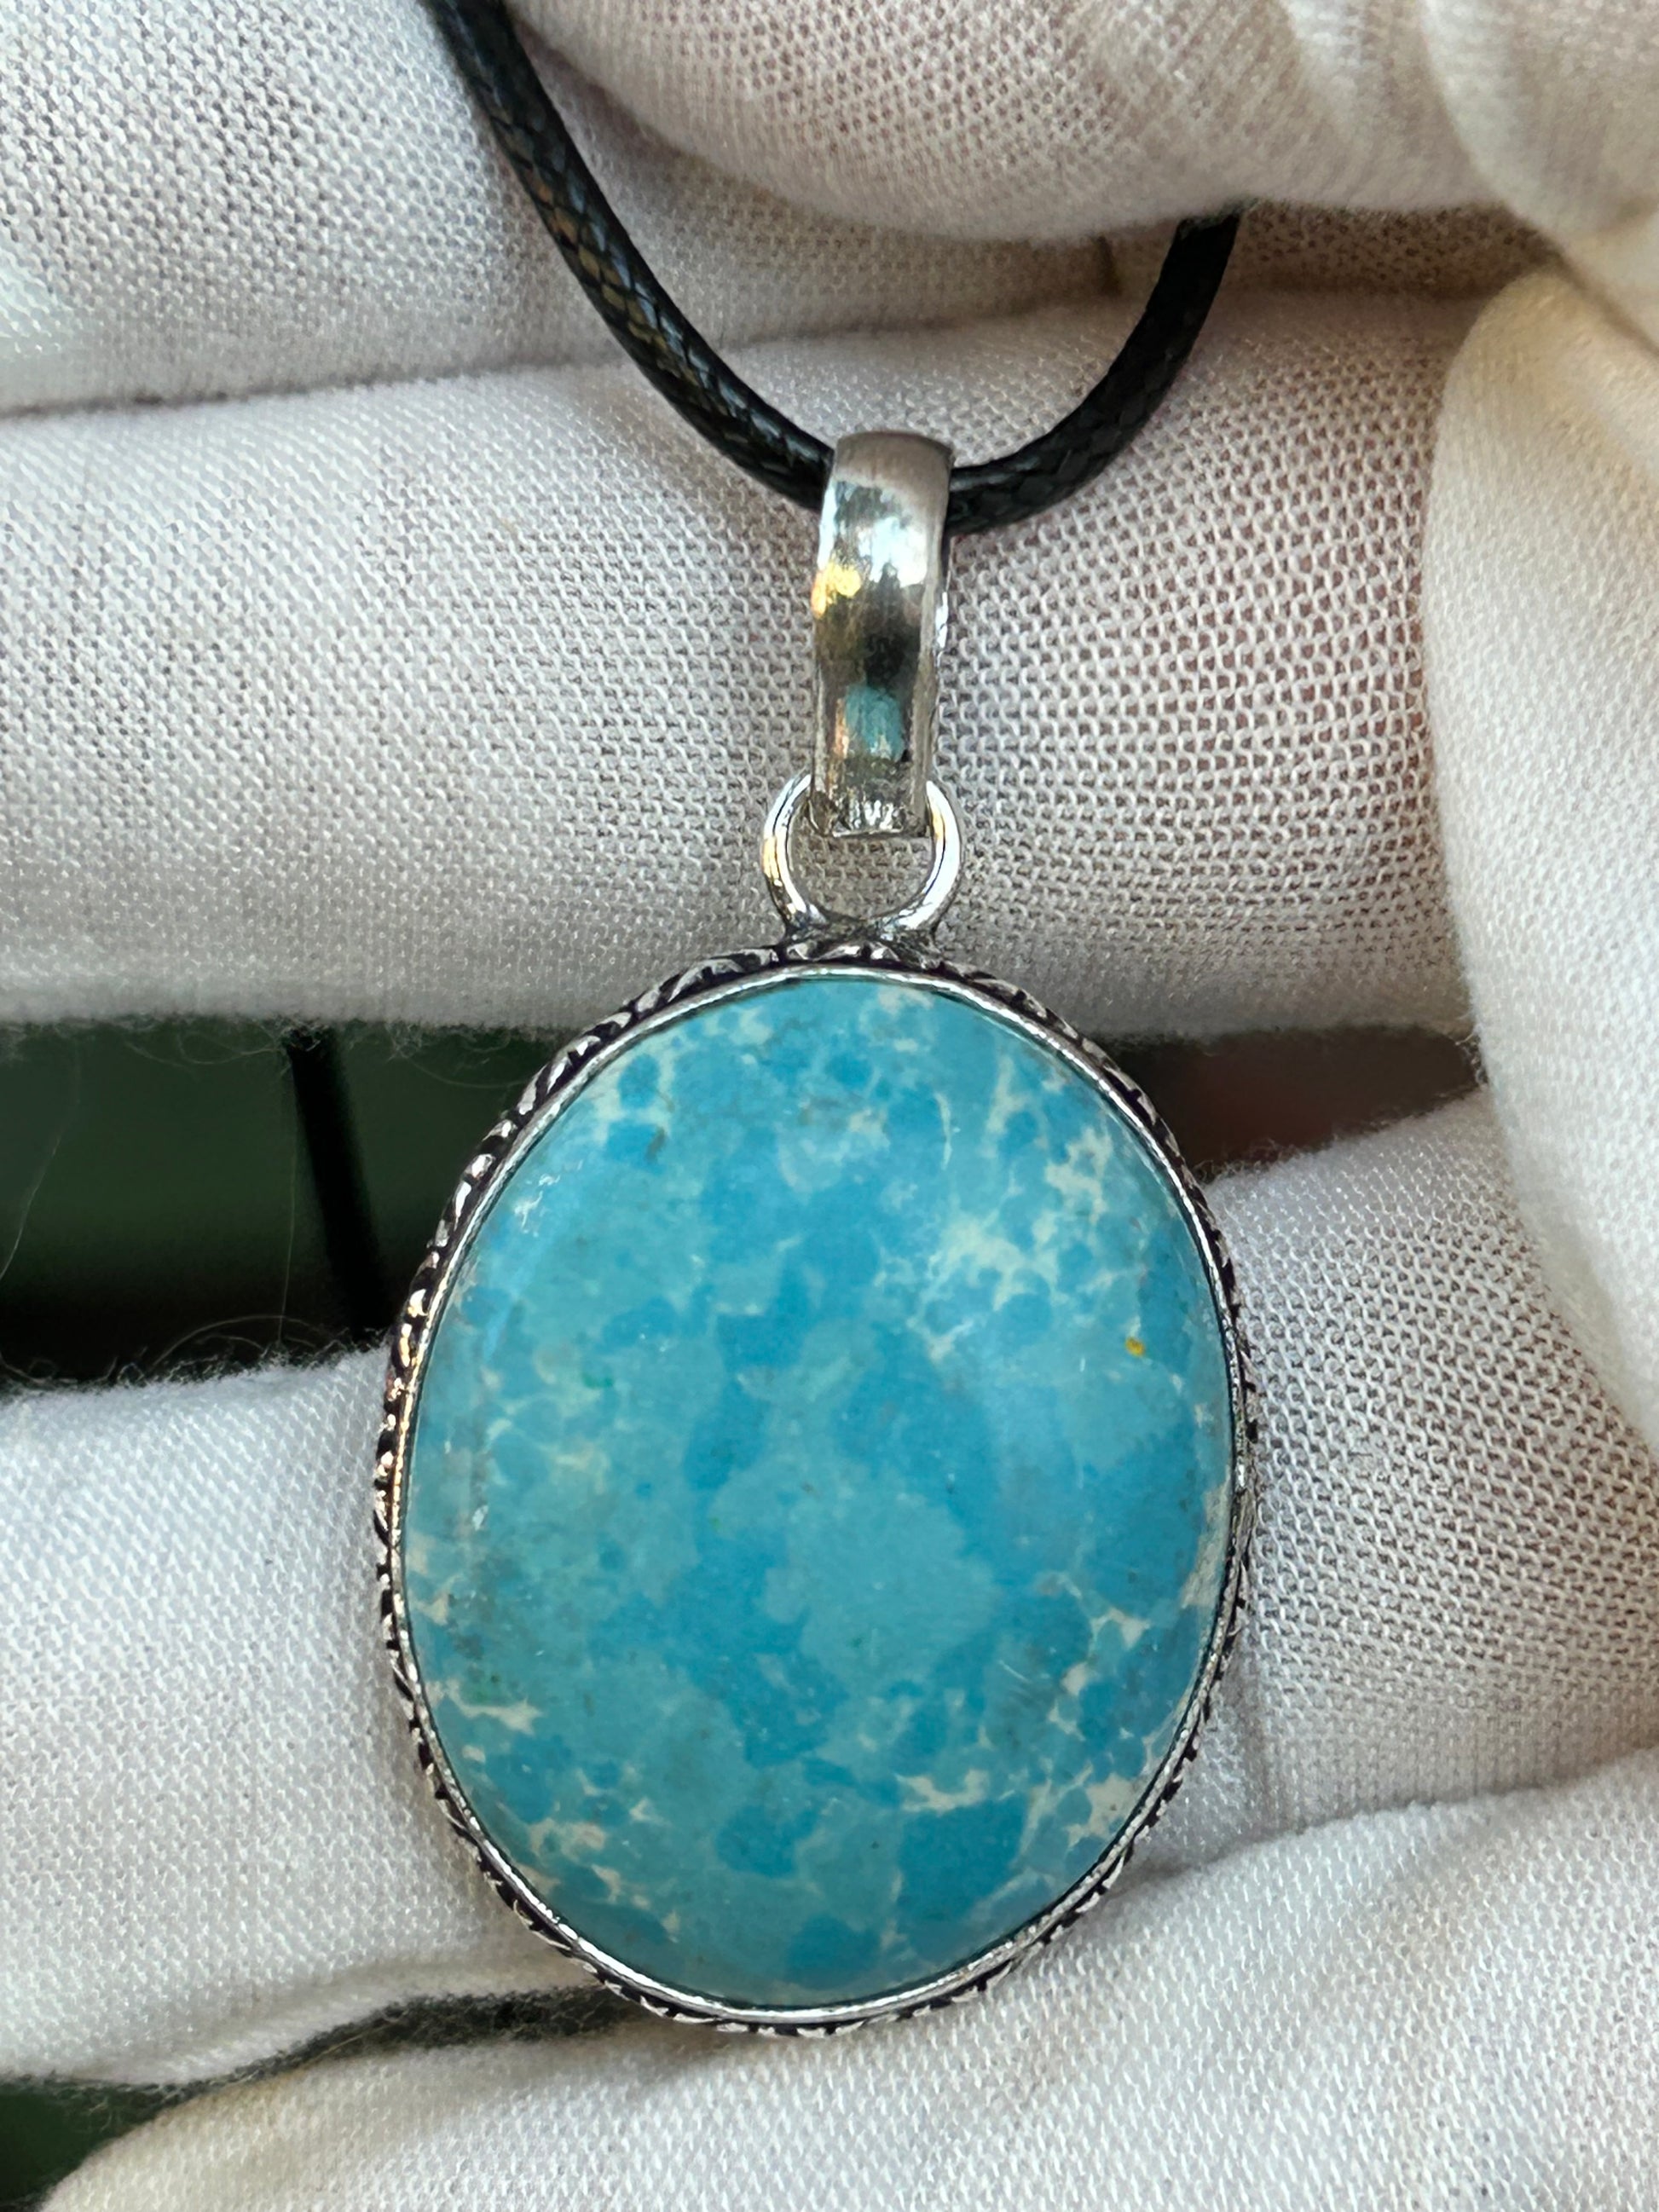 Blue Larimar oval pendant set in 925 Sterling silver setting with black cord necklace